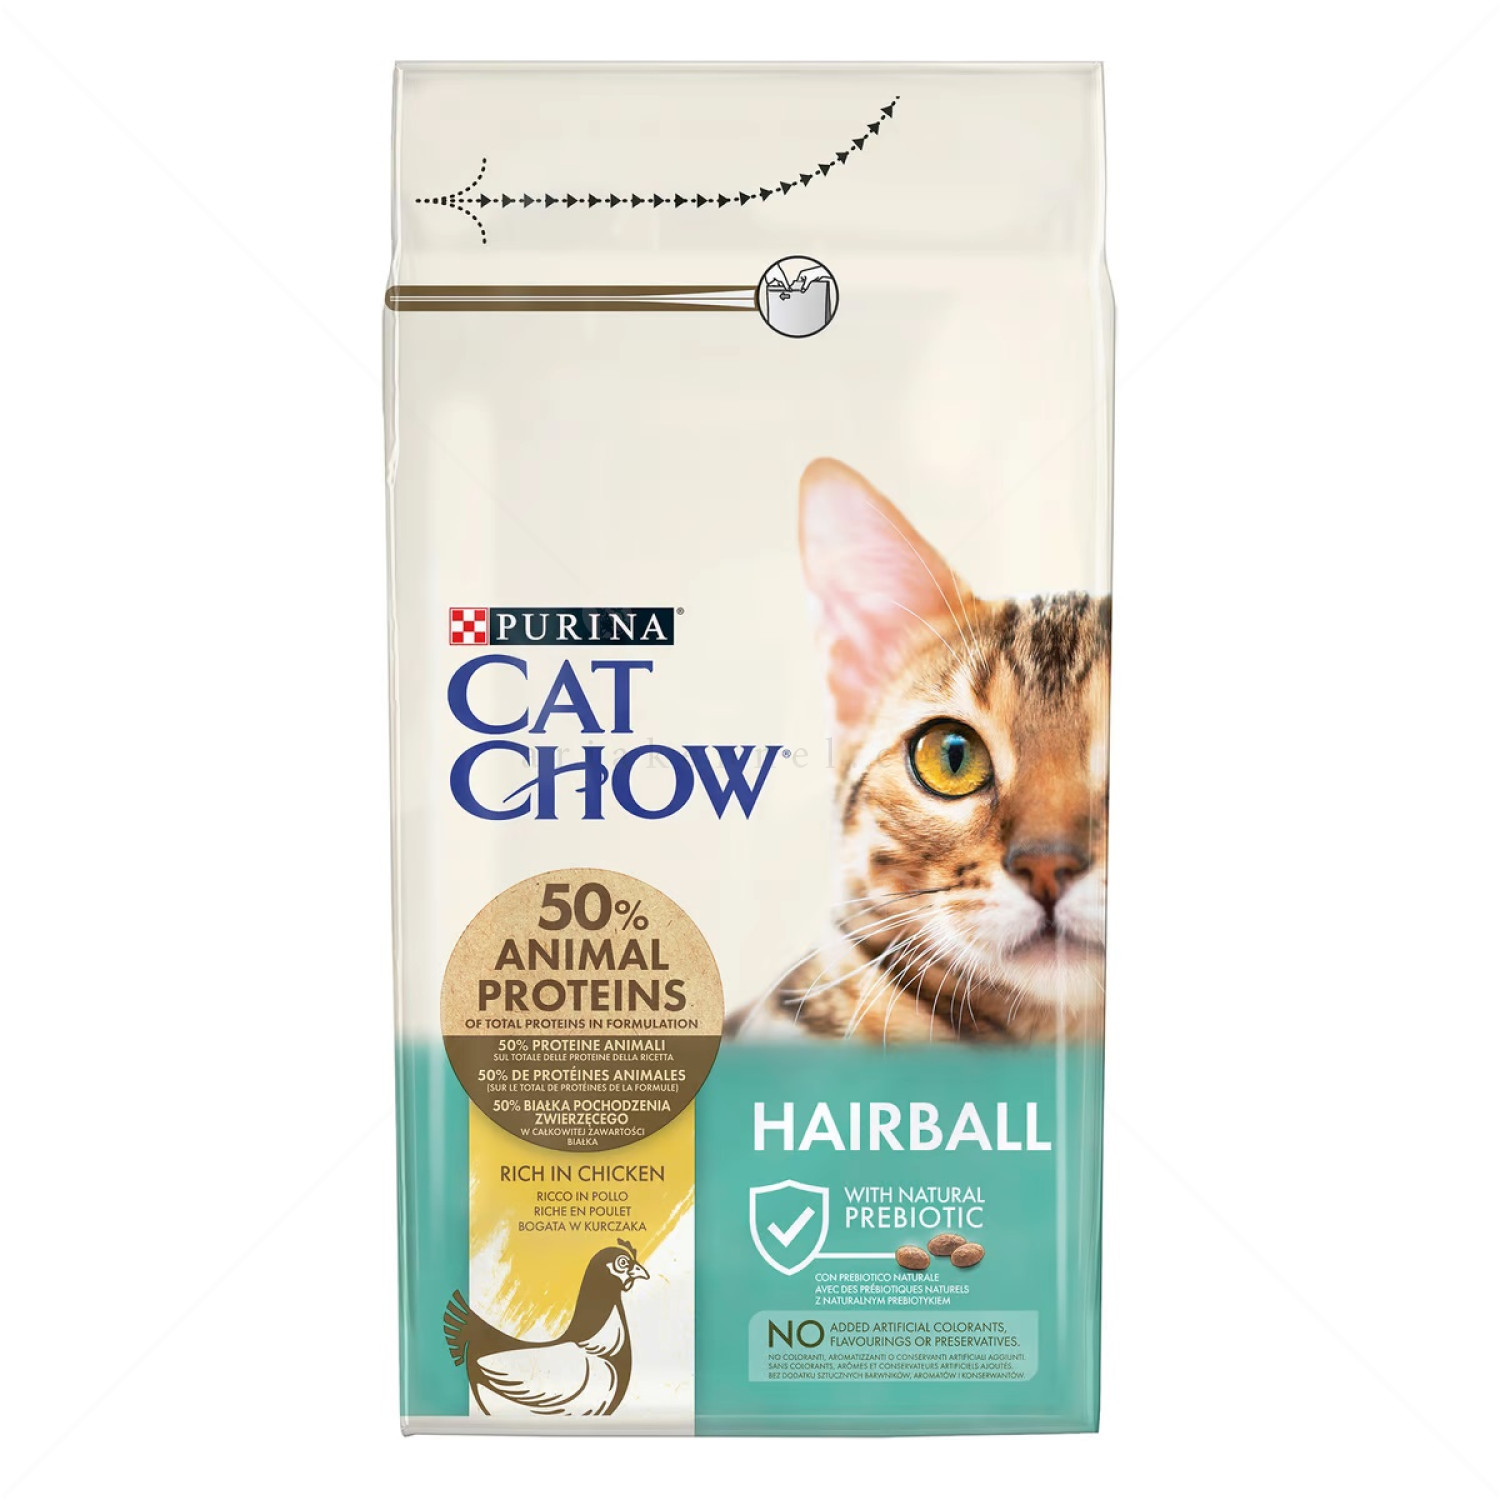 CAT CHOW Special Care 15 кг. Hairball с пилешко месо